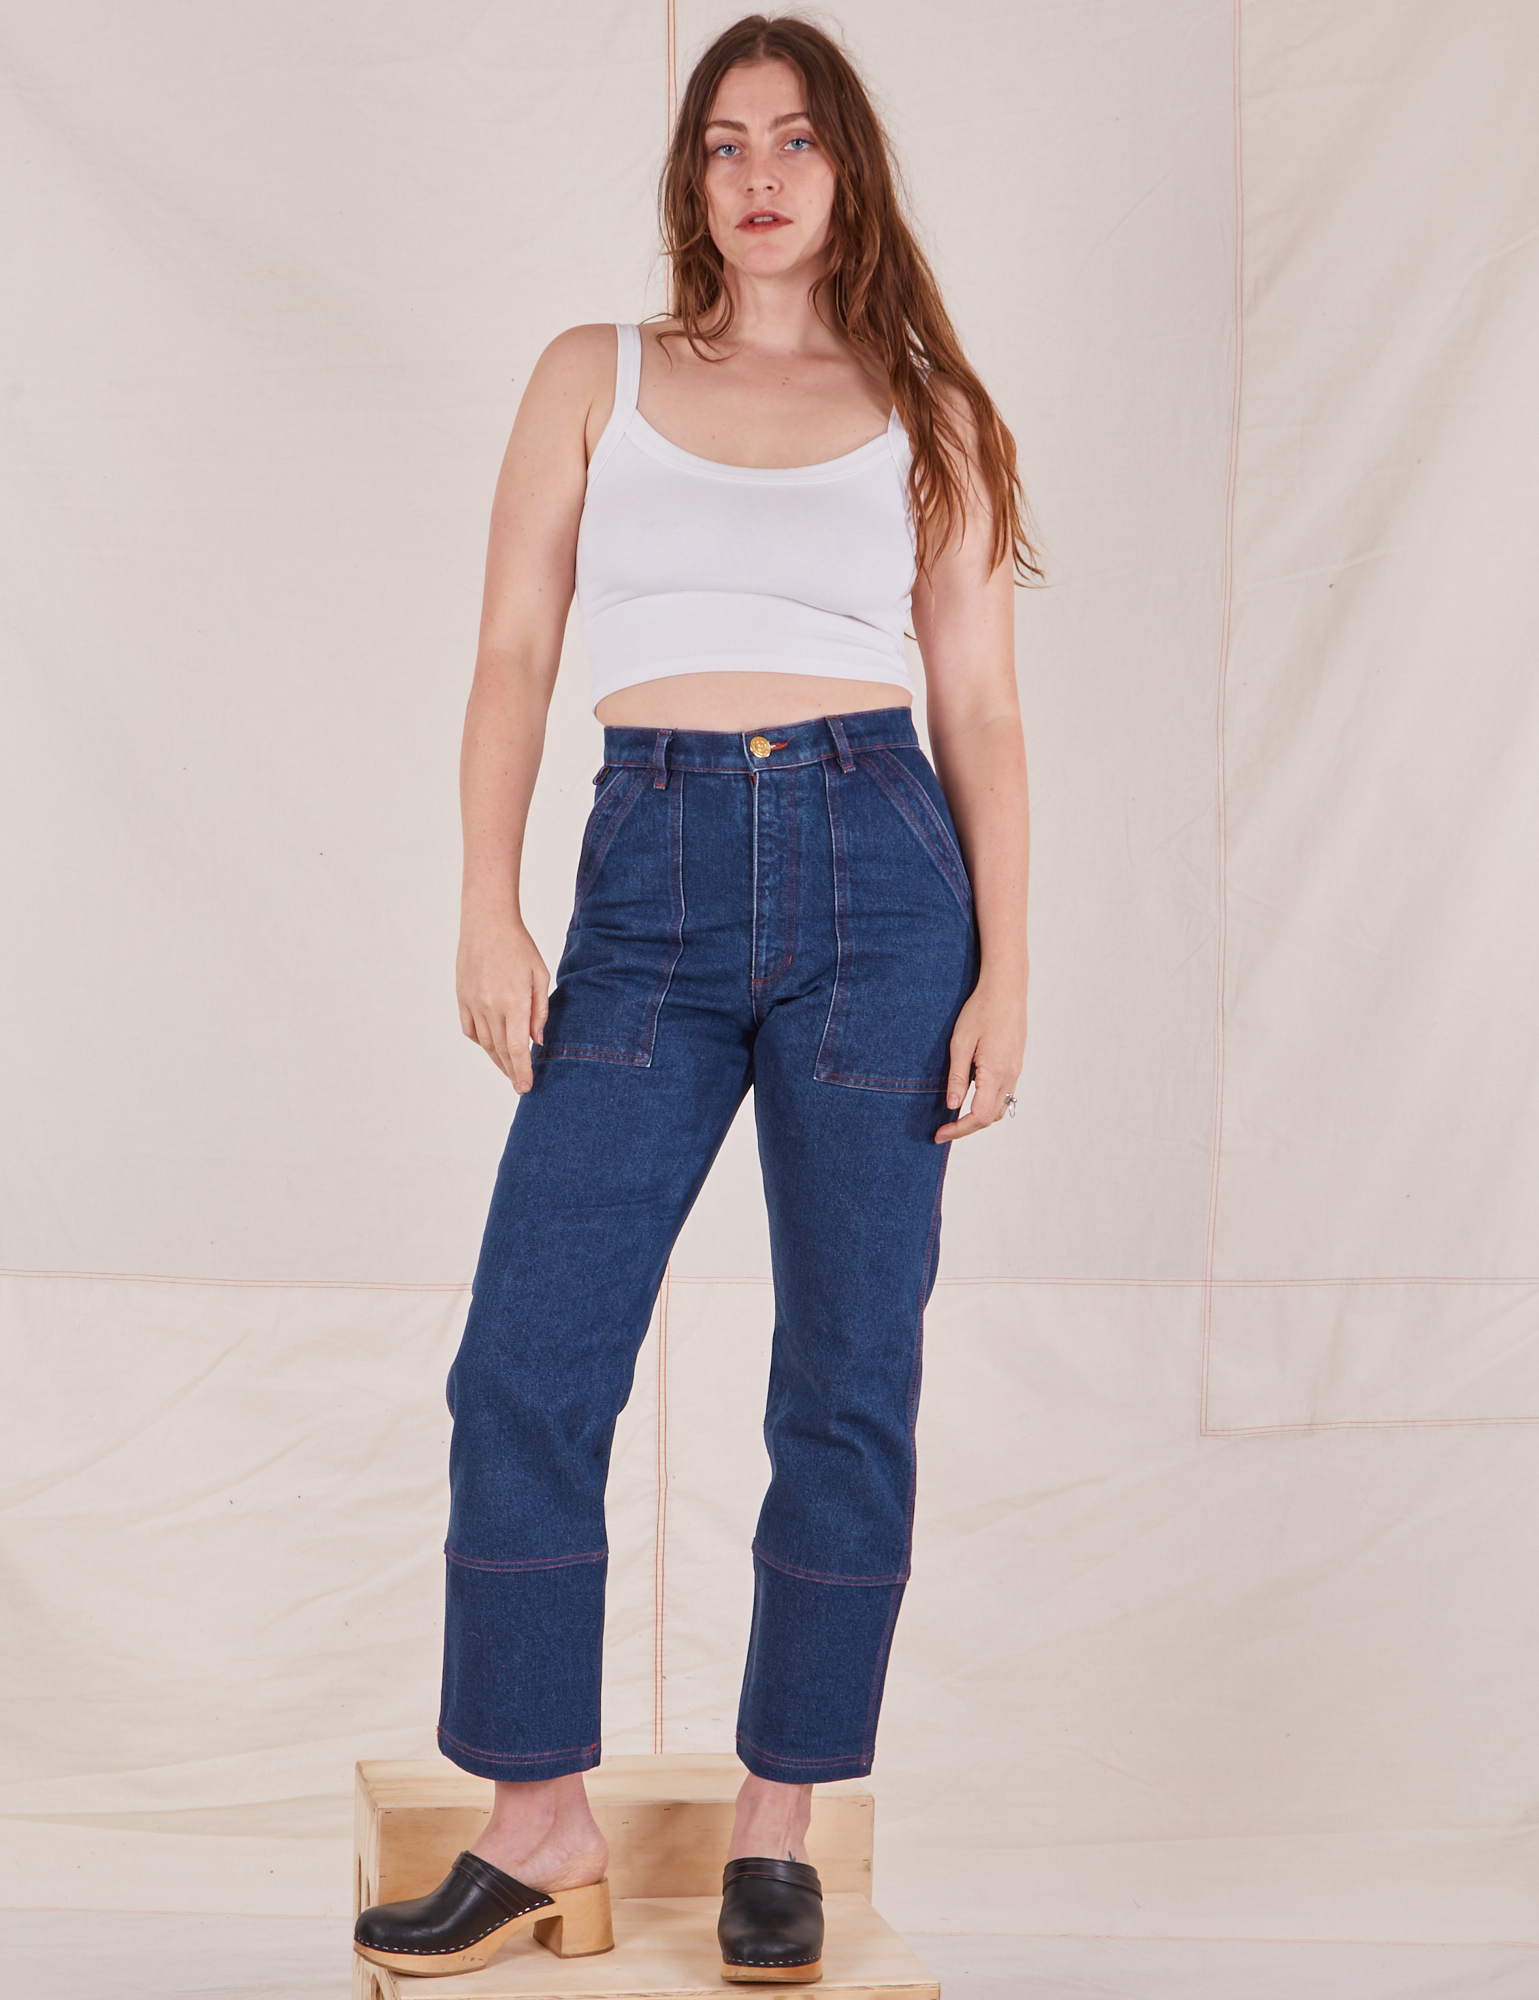 Allison is 5&#39;10&quot; and wearing S Carpenter Jeans in Dark Wash paired with vintage off-white Cami